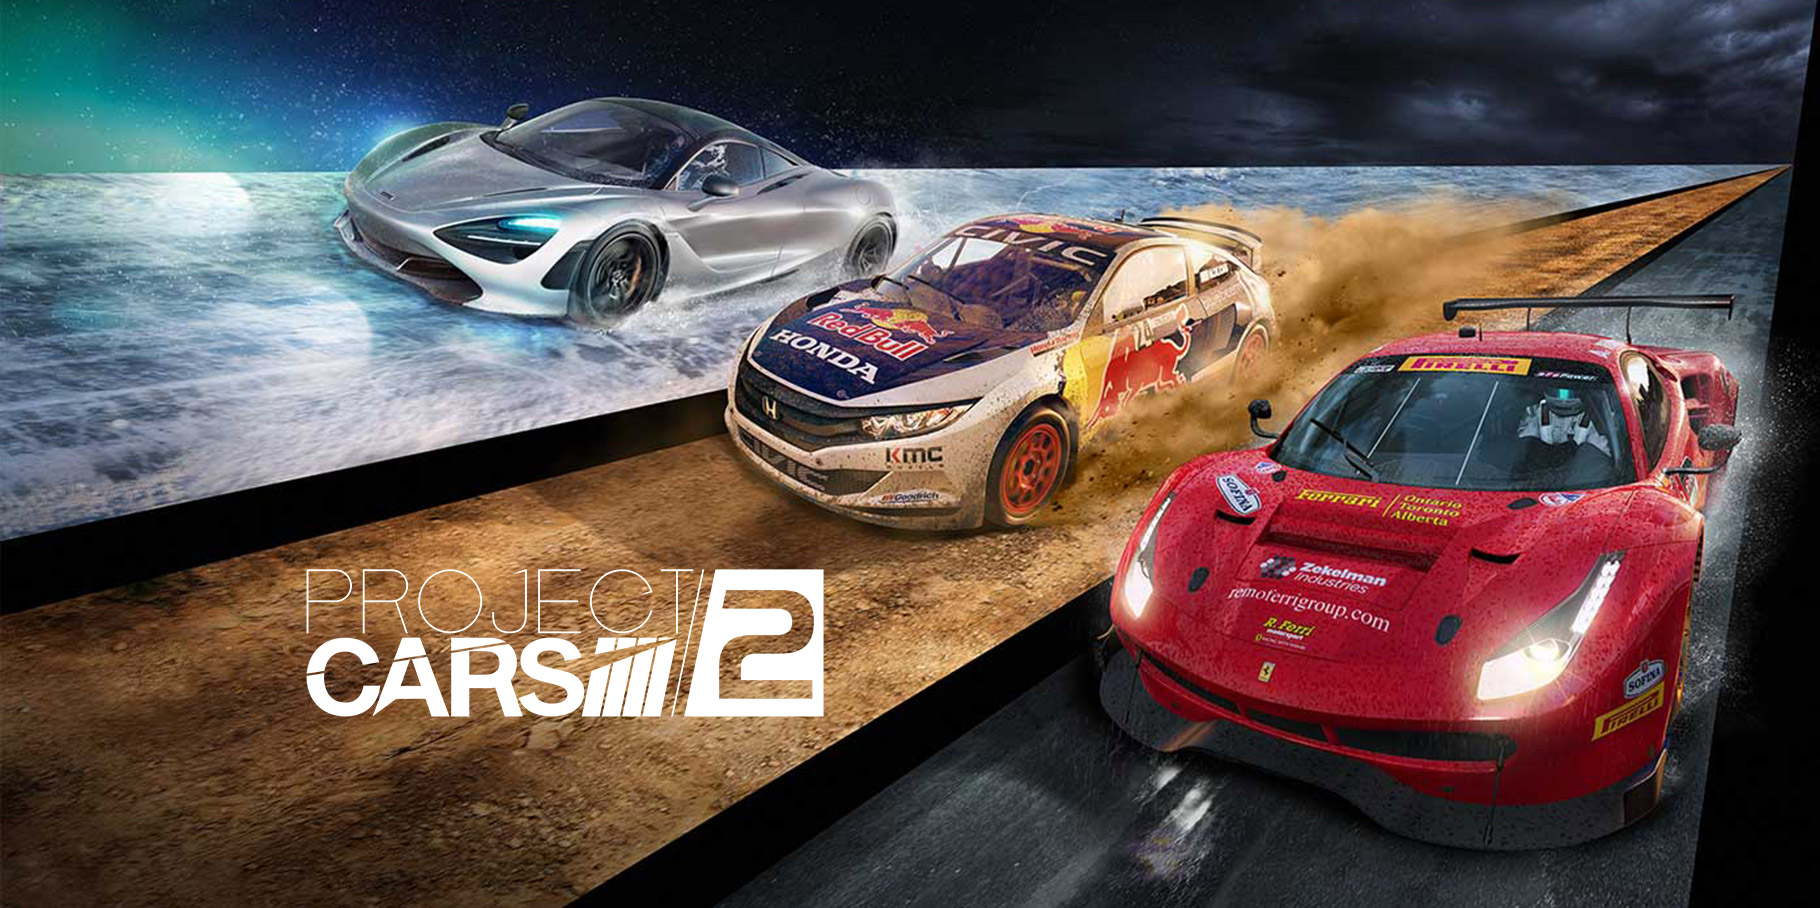 Artwork for Project Cars 2